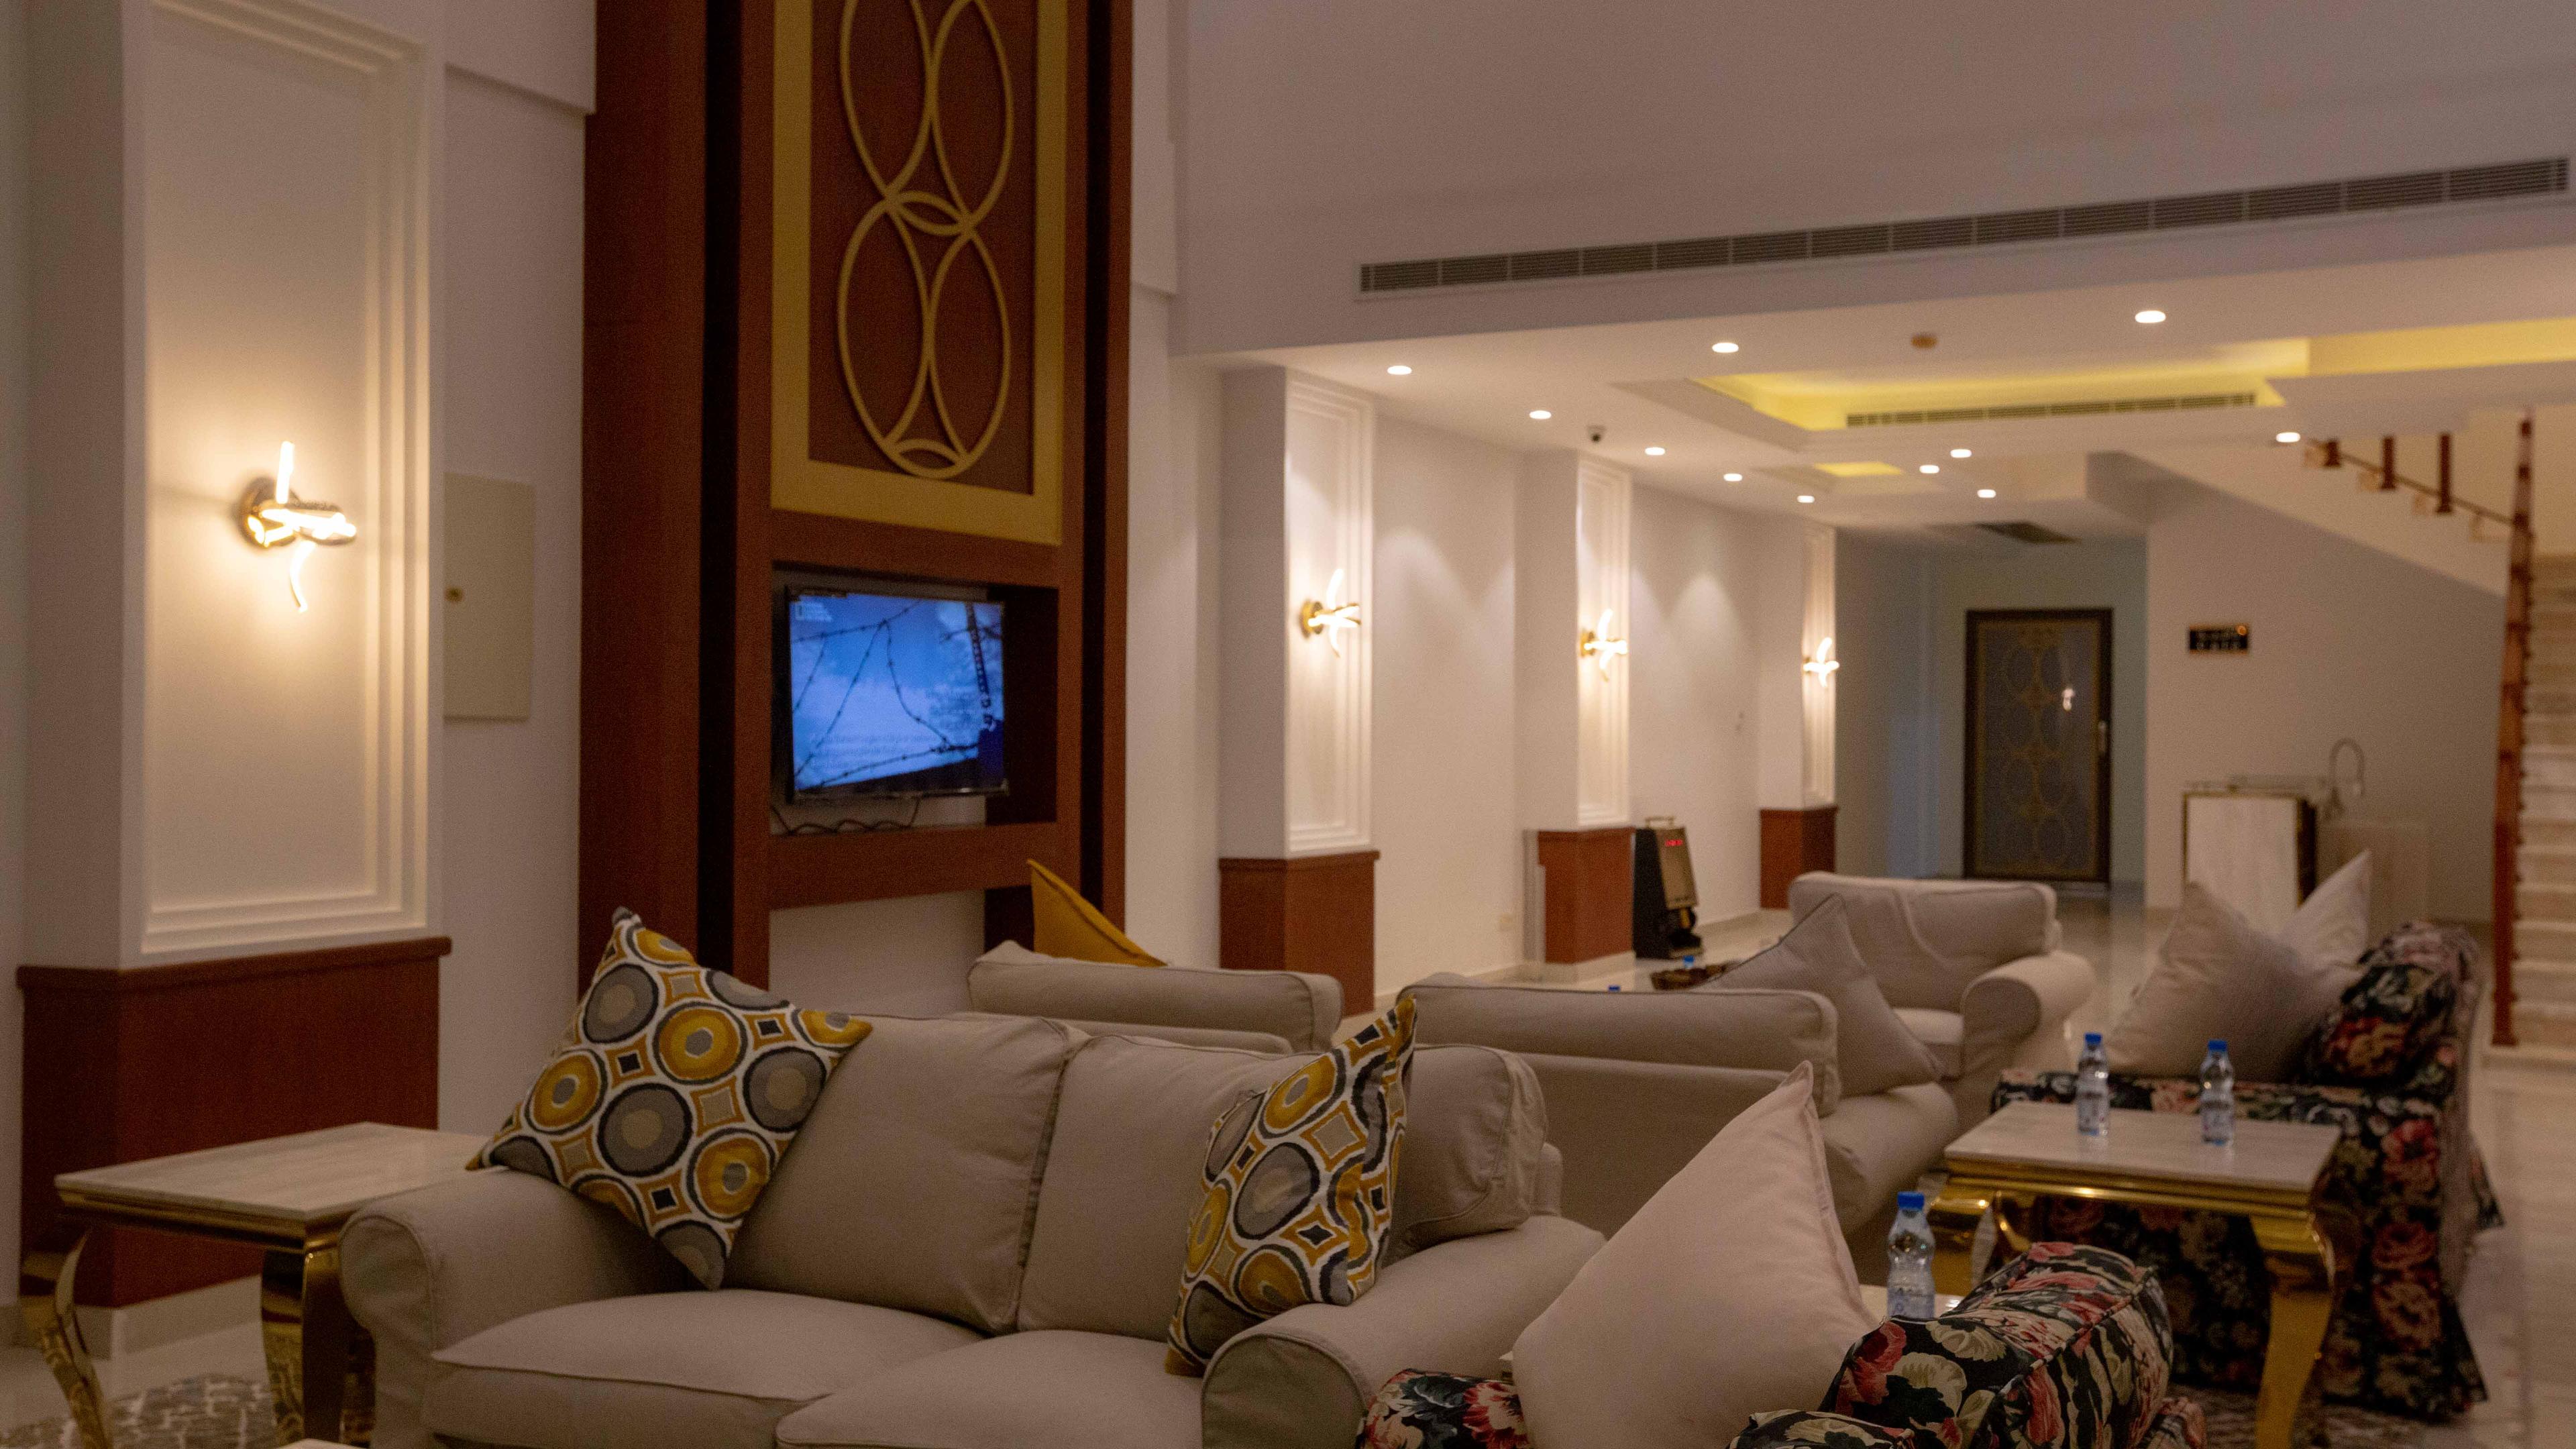 AL Woroud Grand Hotel Furnished Suites - Other